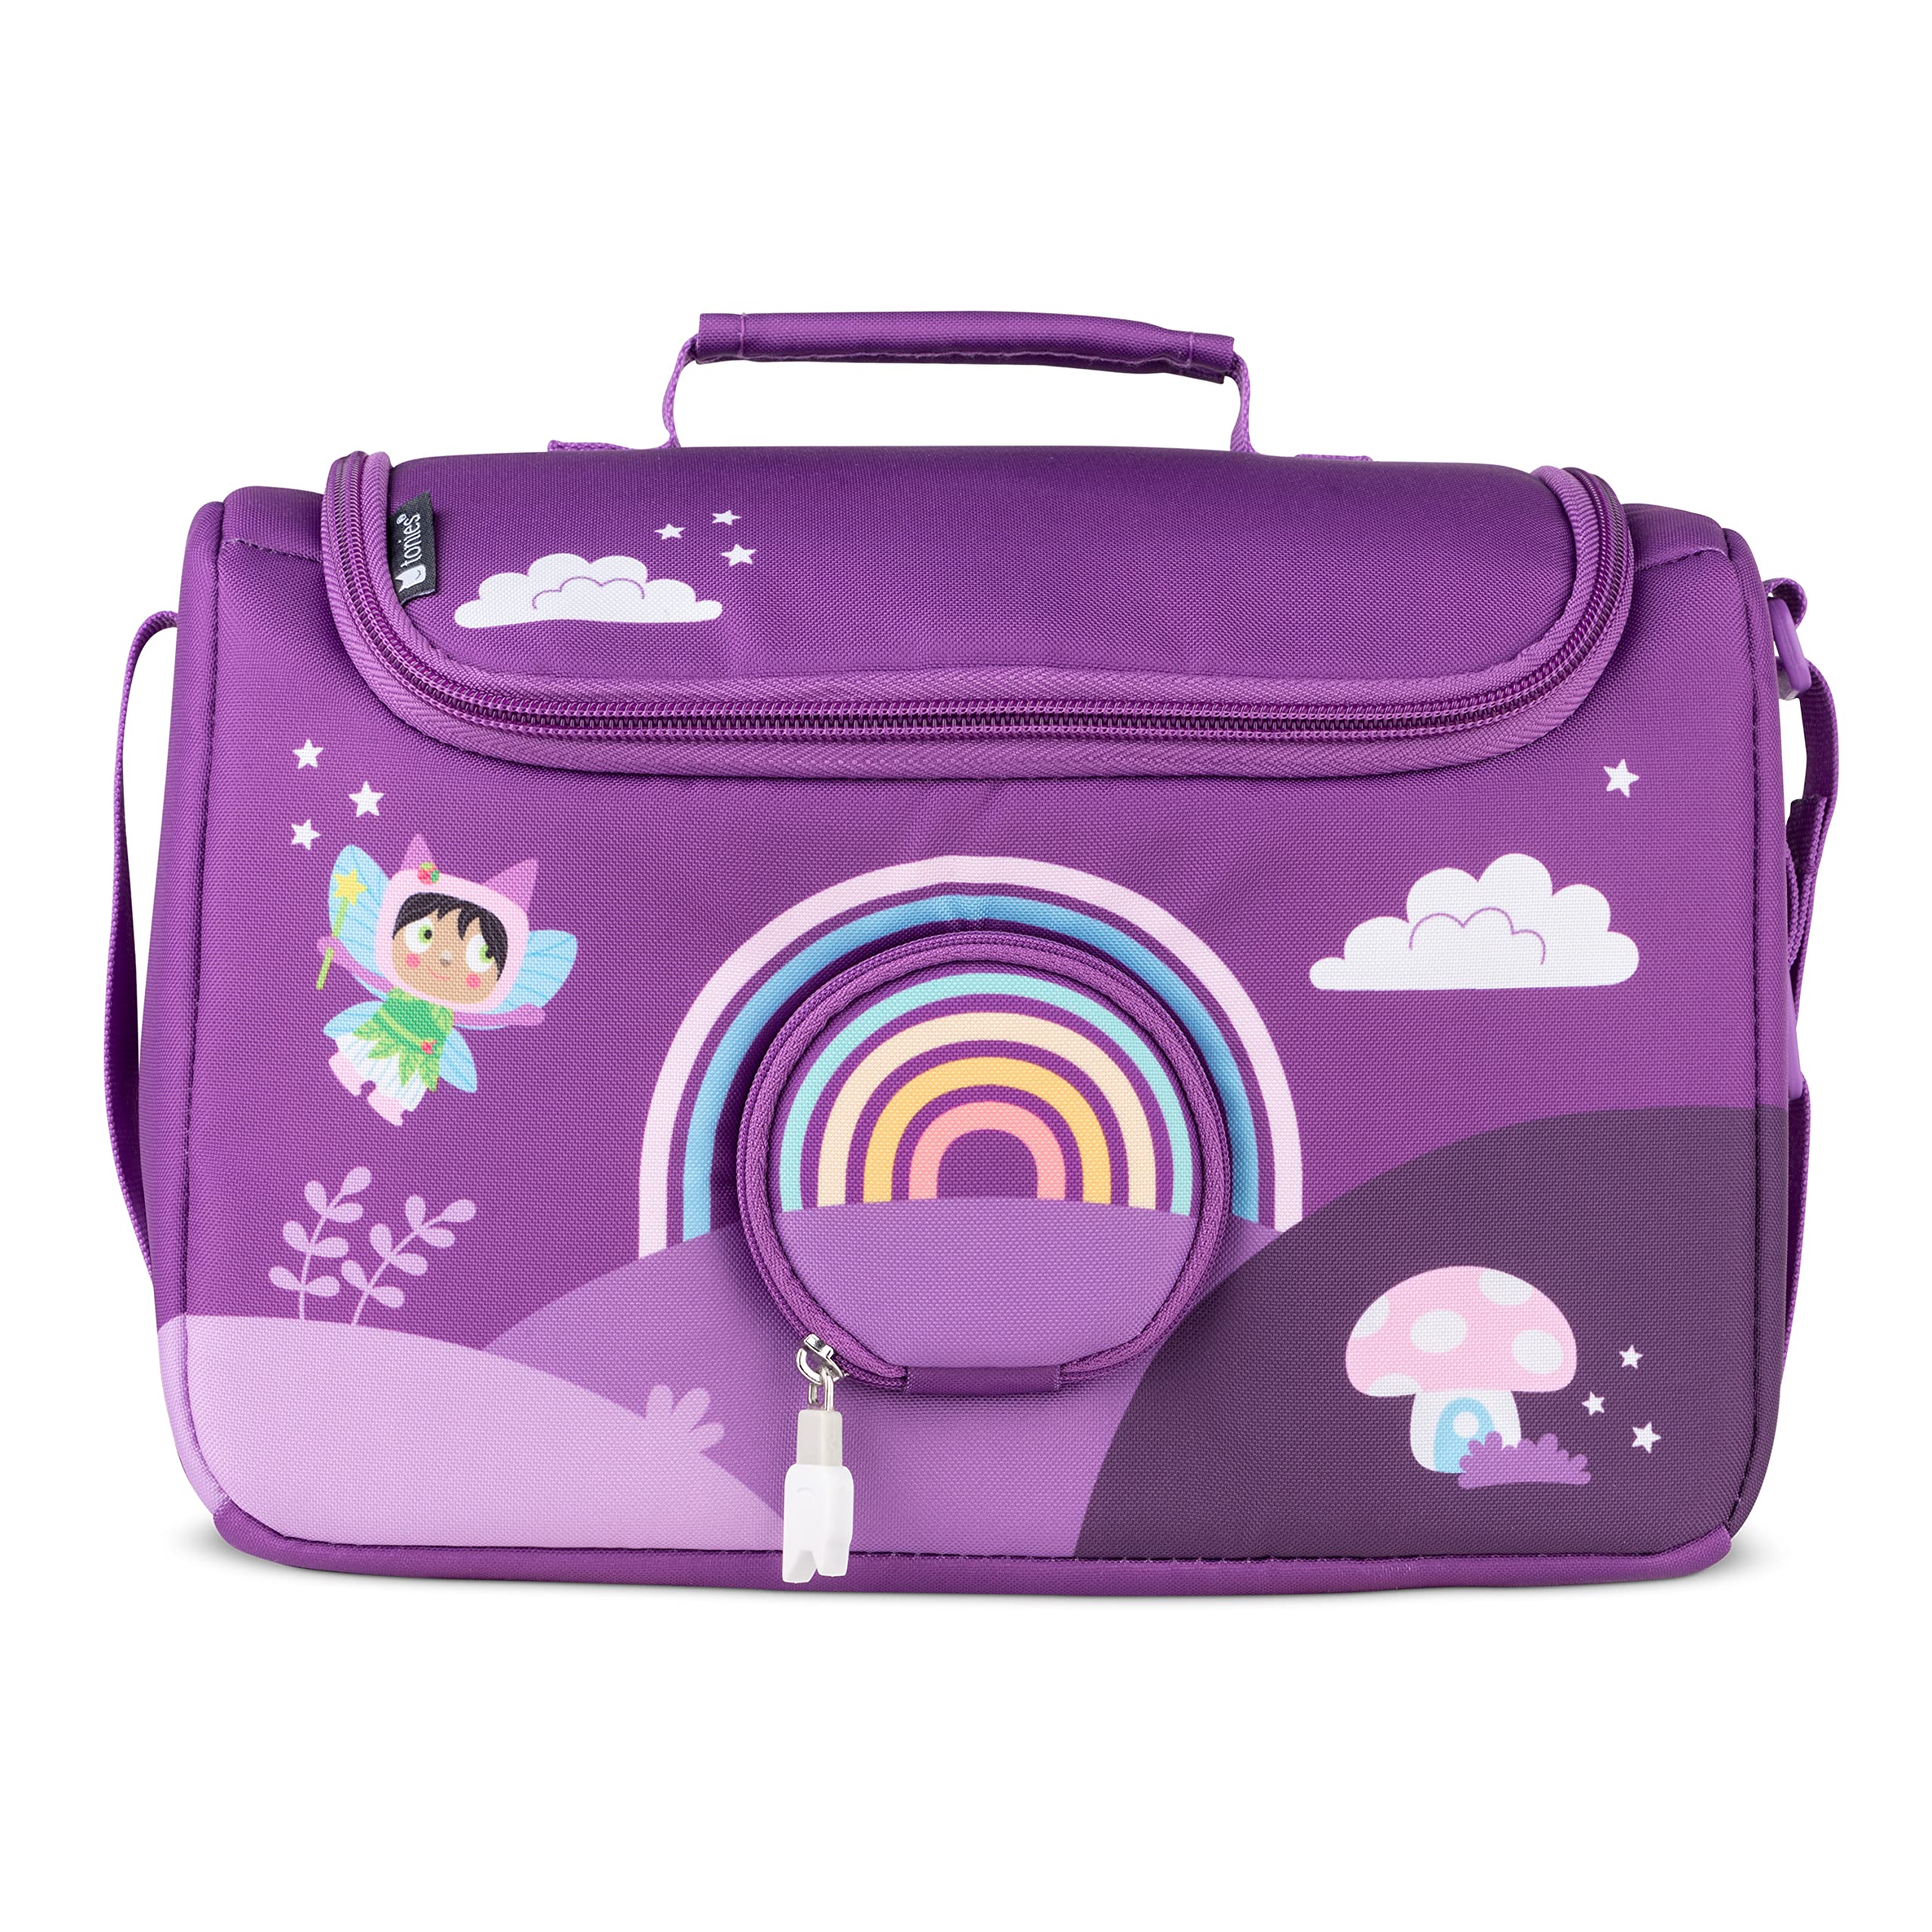 Tonies Listen & Play Bag - Secure Protection for your Toniebox, Headphones, charging Station, and 6 Tonies - Over the Rainbow